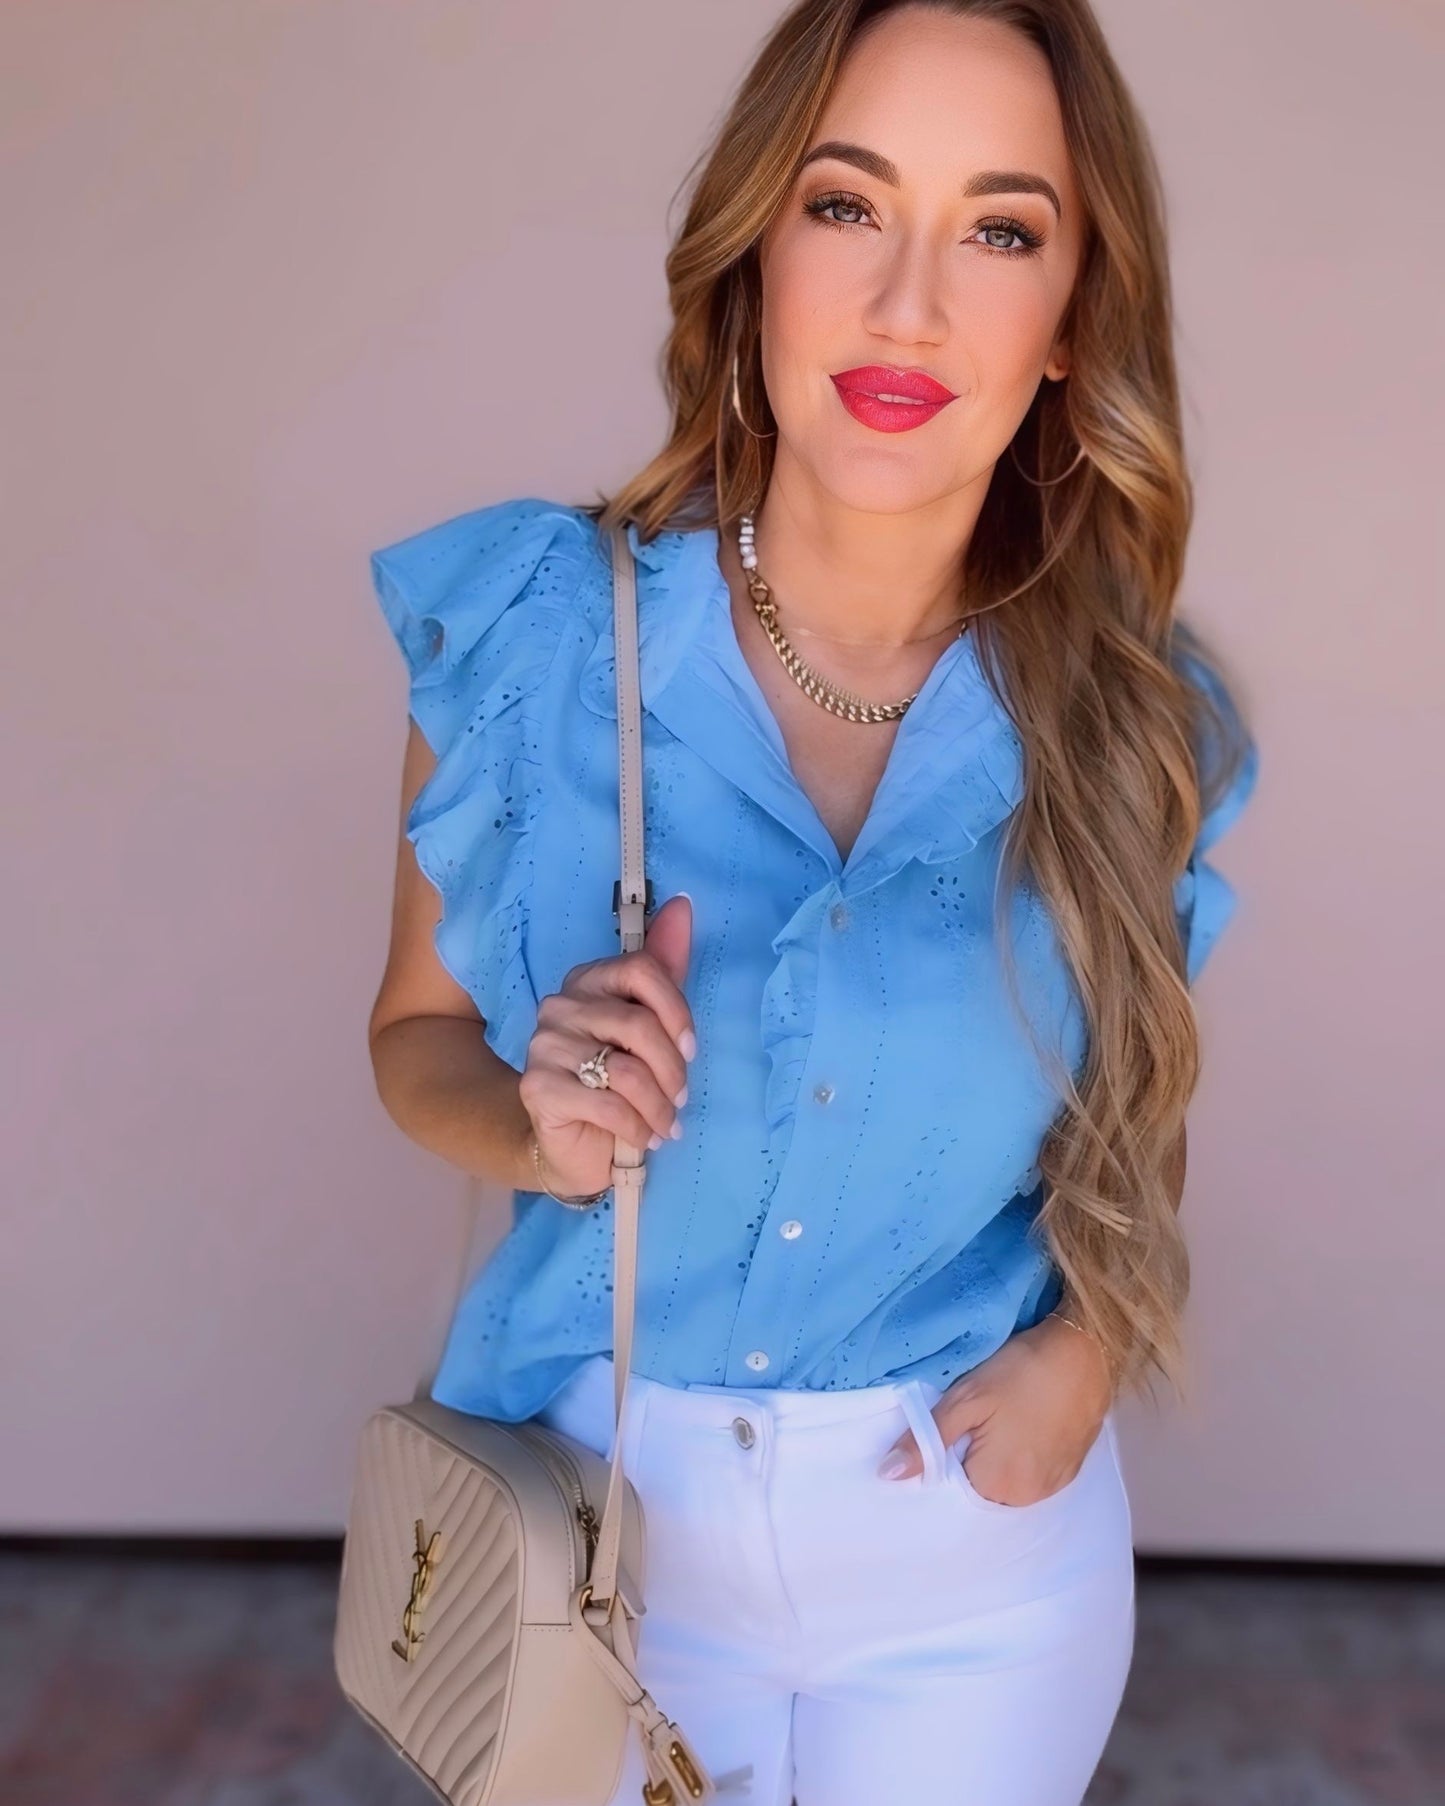 Picnic Date Blue Eyelet Button Down Top